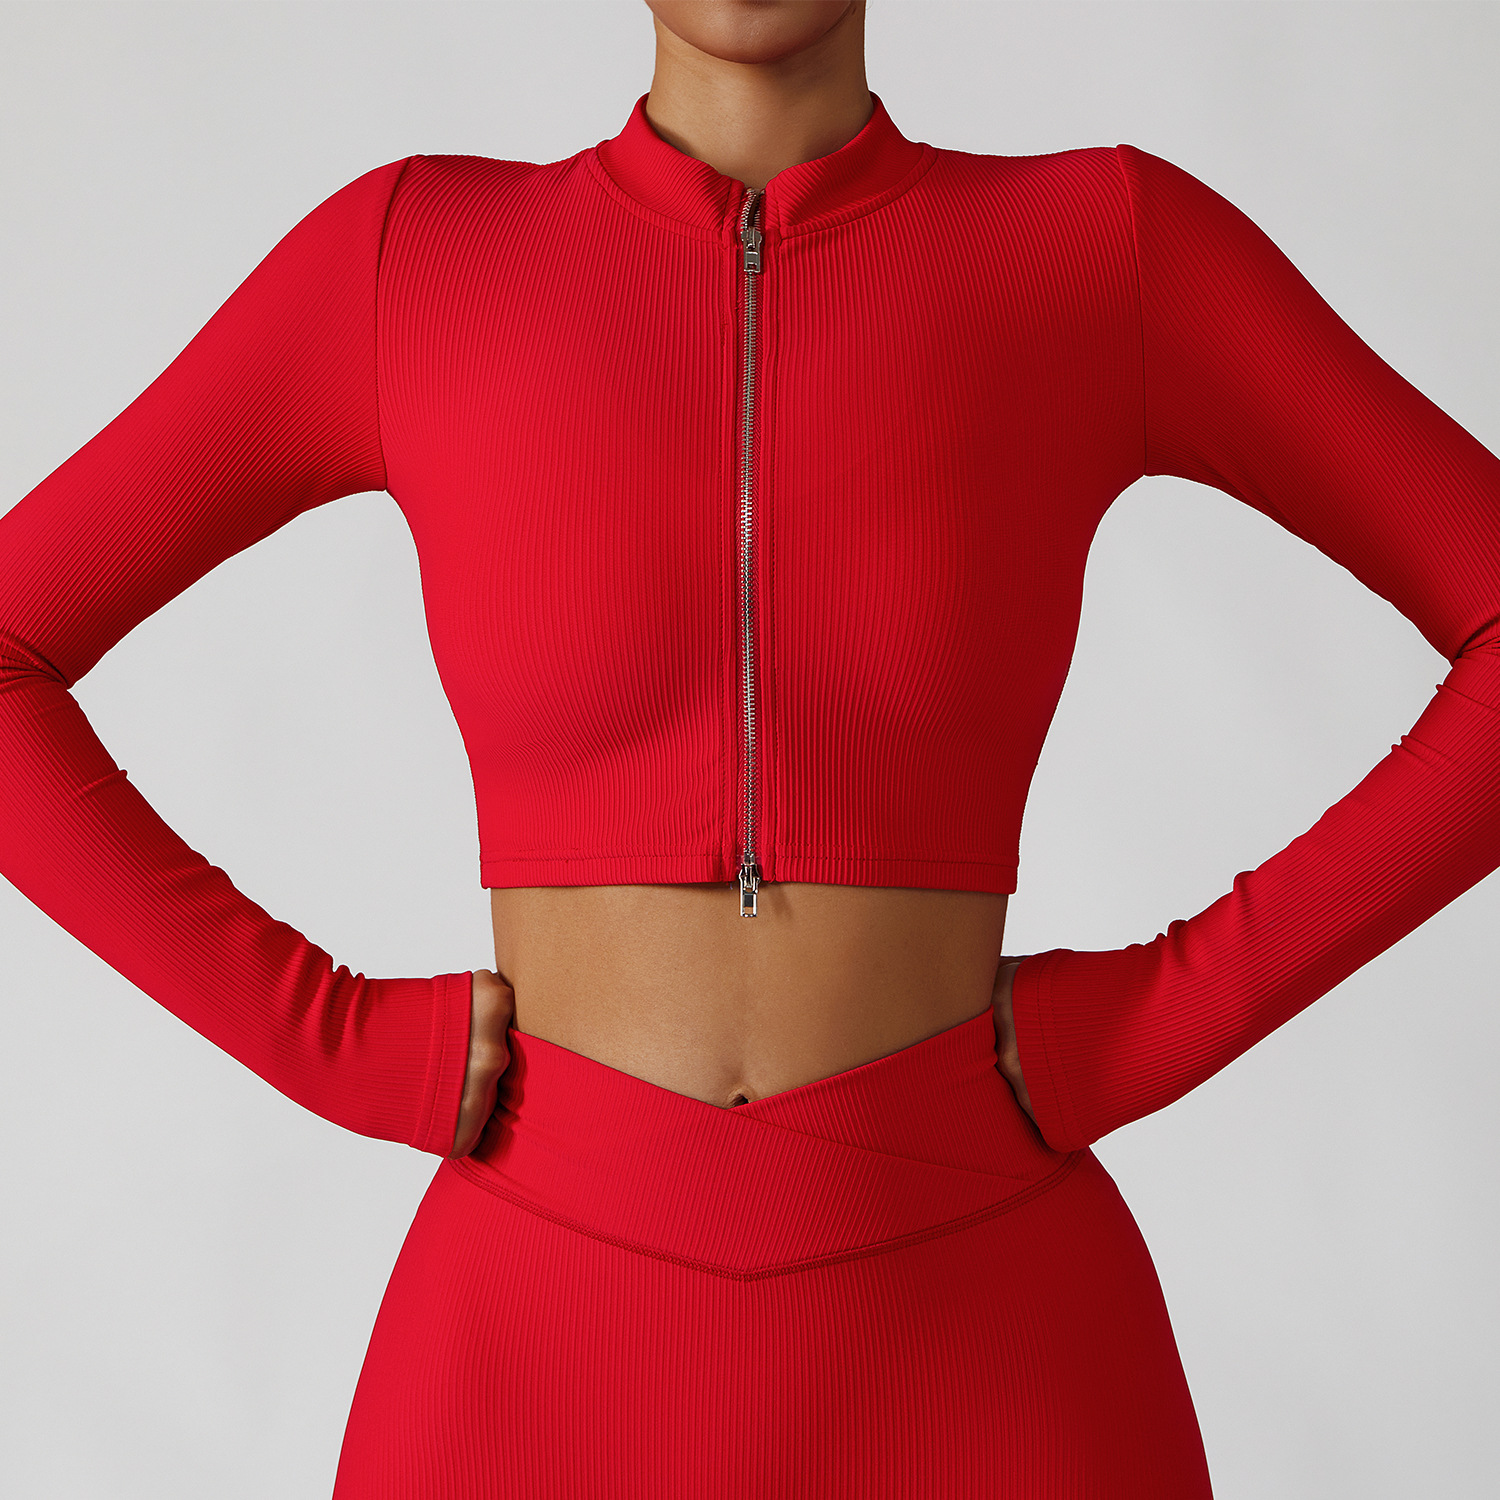 Plus Size Workout Sports Top Women Autumn Winter Running Jacket Zipper Long  Sleeve Casual Loose Breathable Athletic Track Jacket Color: coral red,  Size: XL